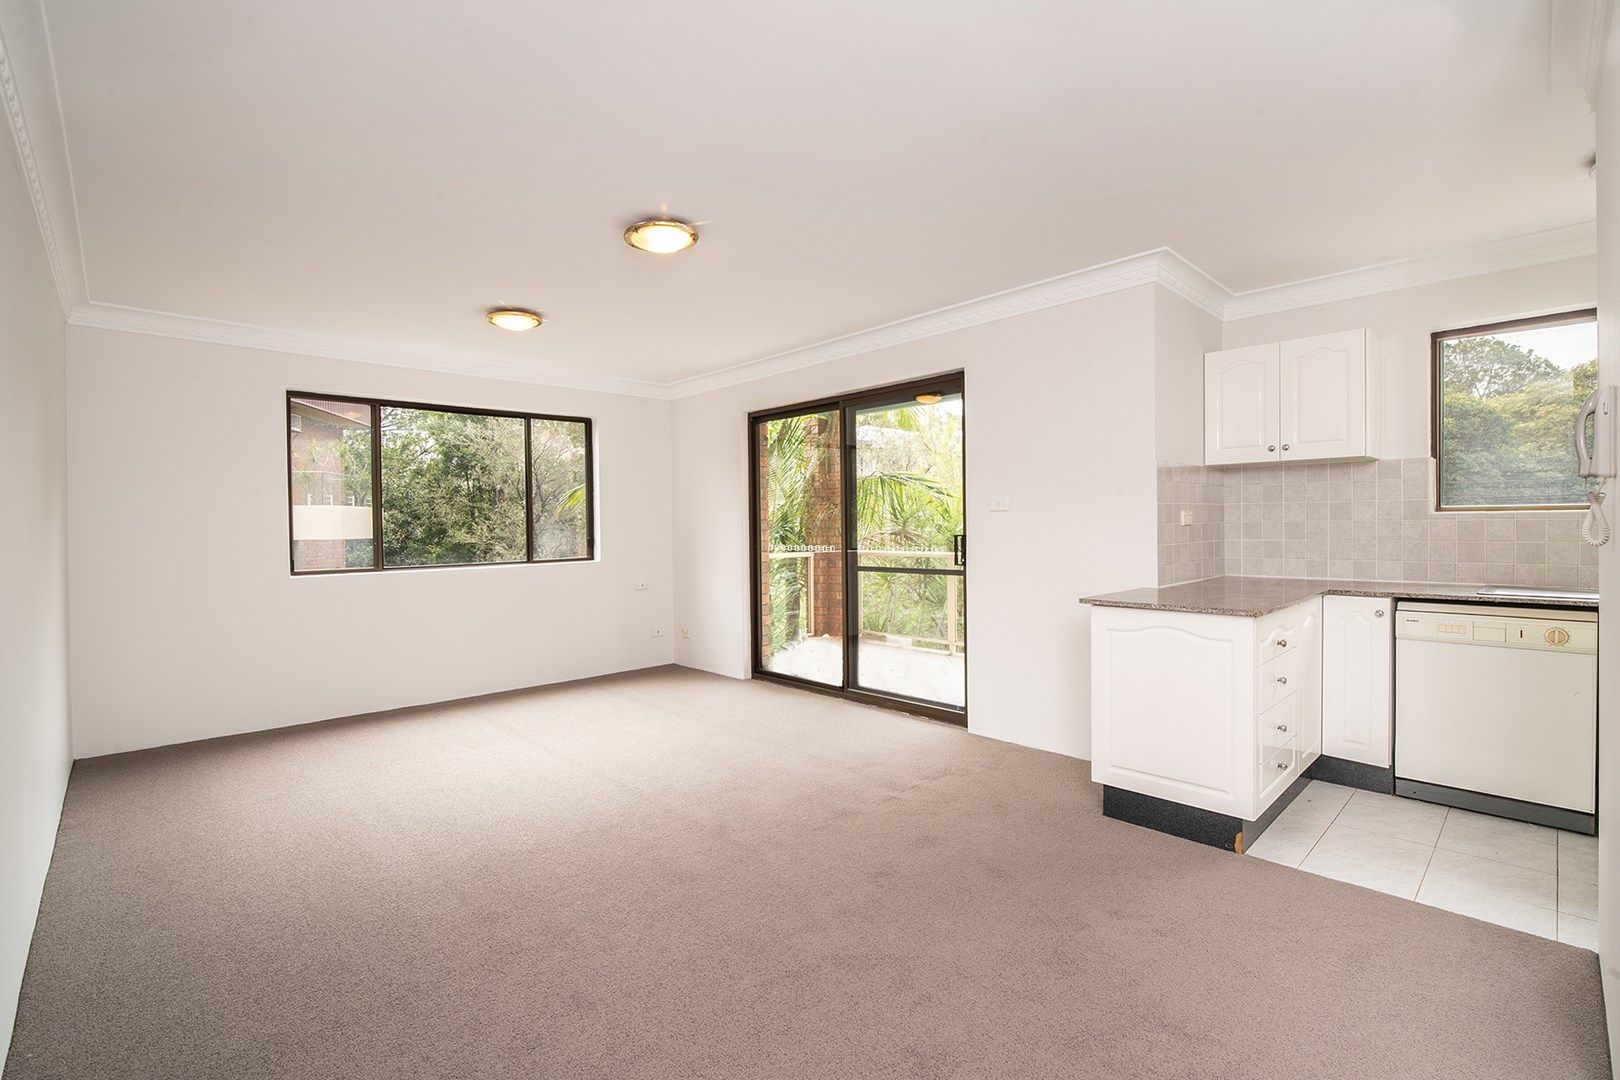 2 bedrooms Apartment / Unit / Flat in 7/2 Fredben Avenue CAMMERAY NSW, 2062